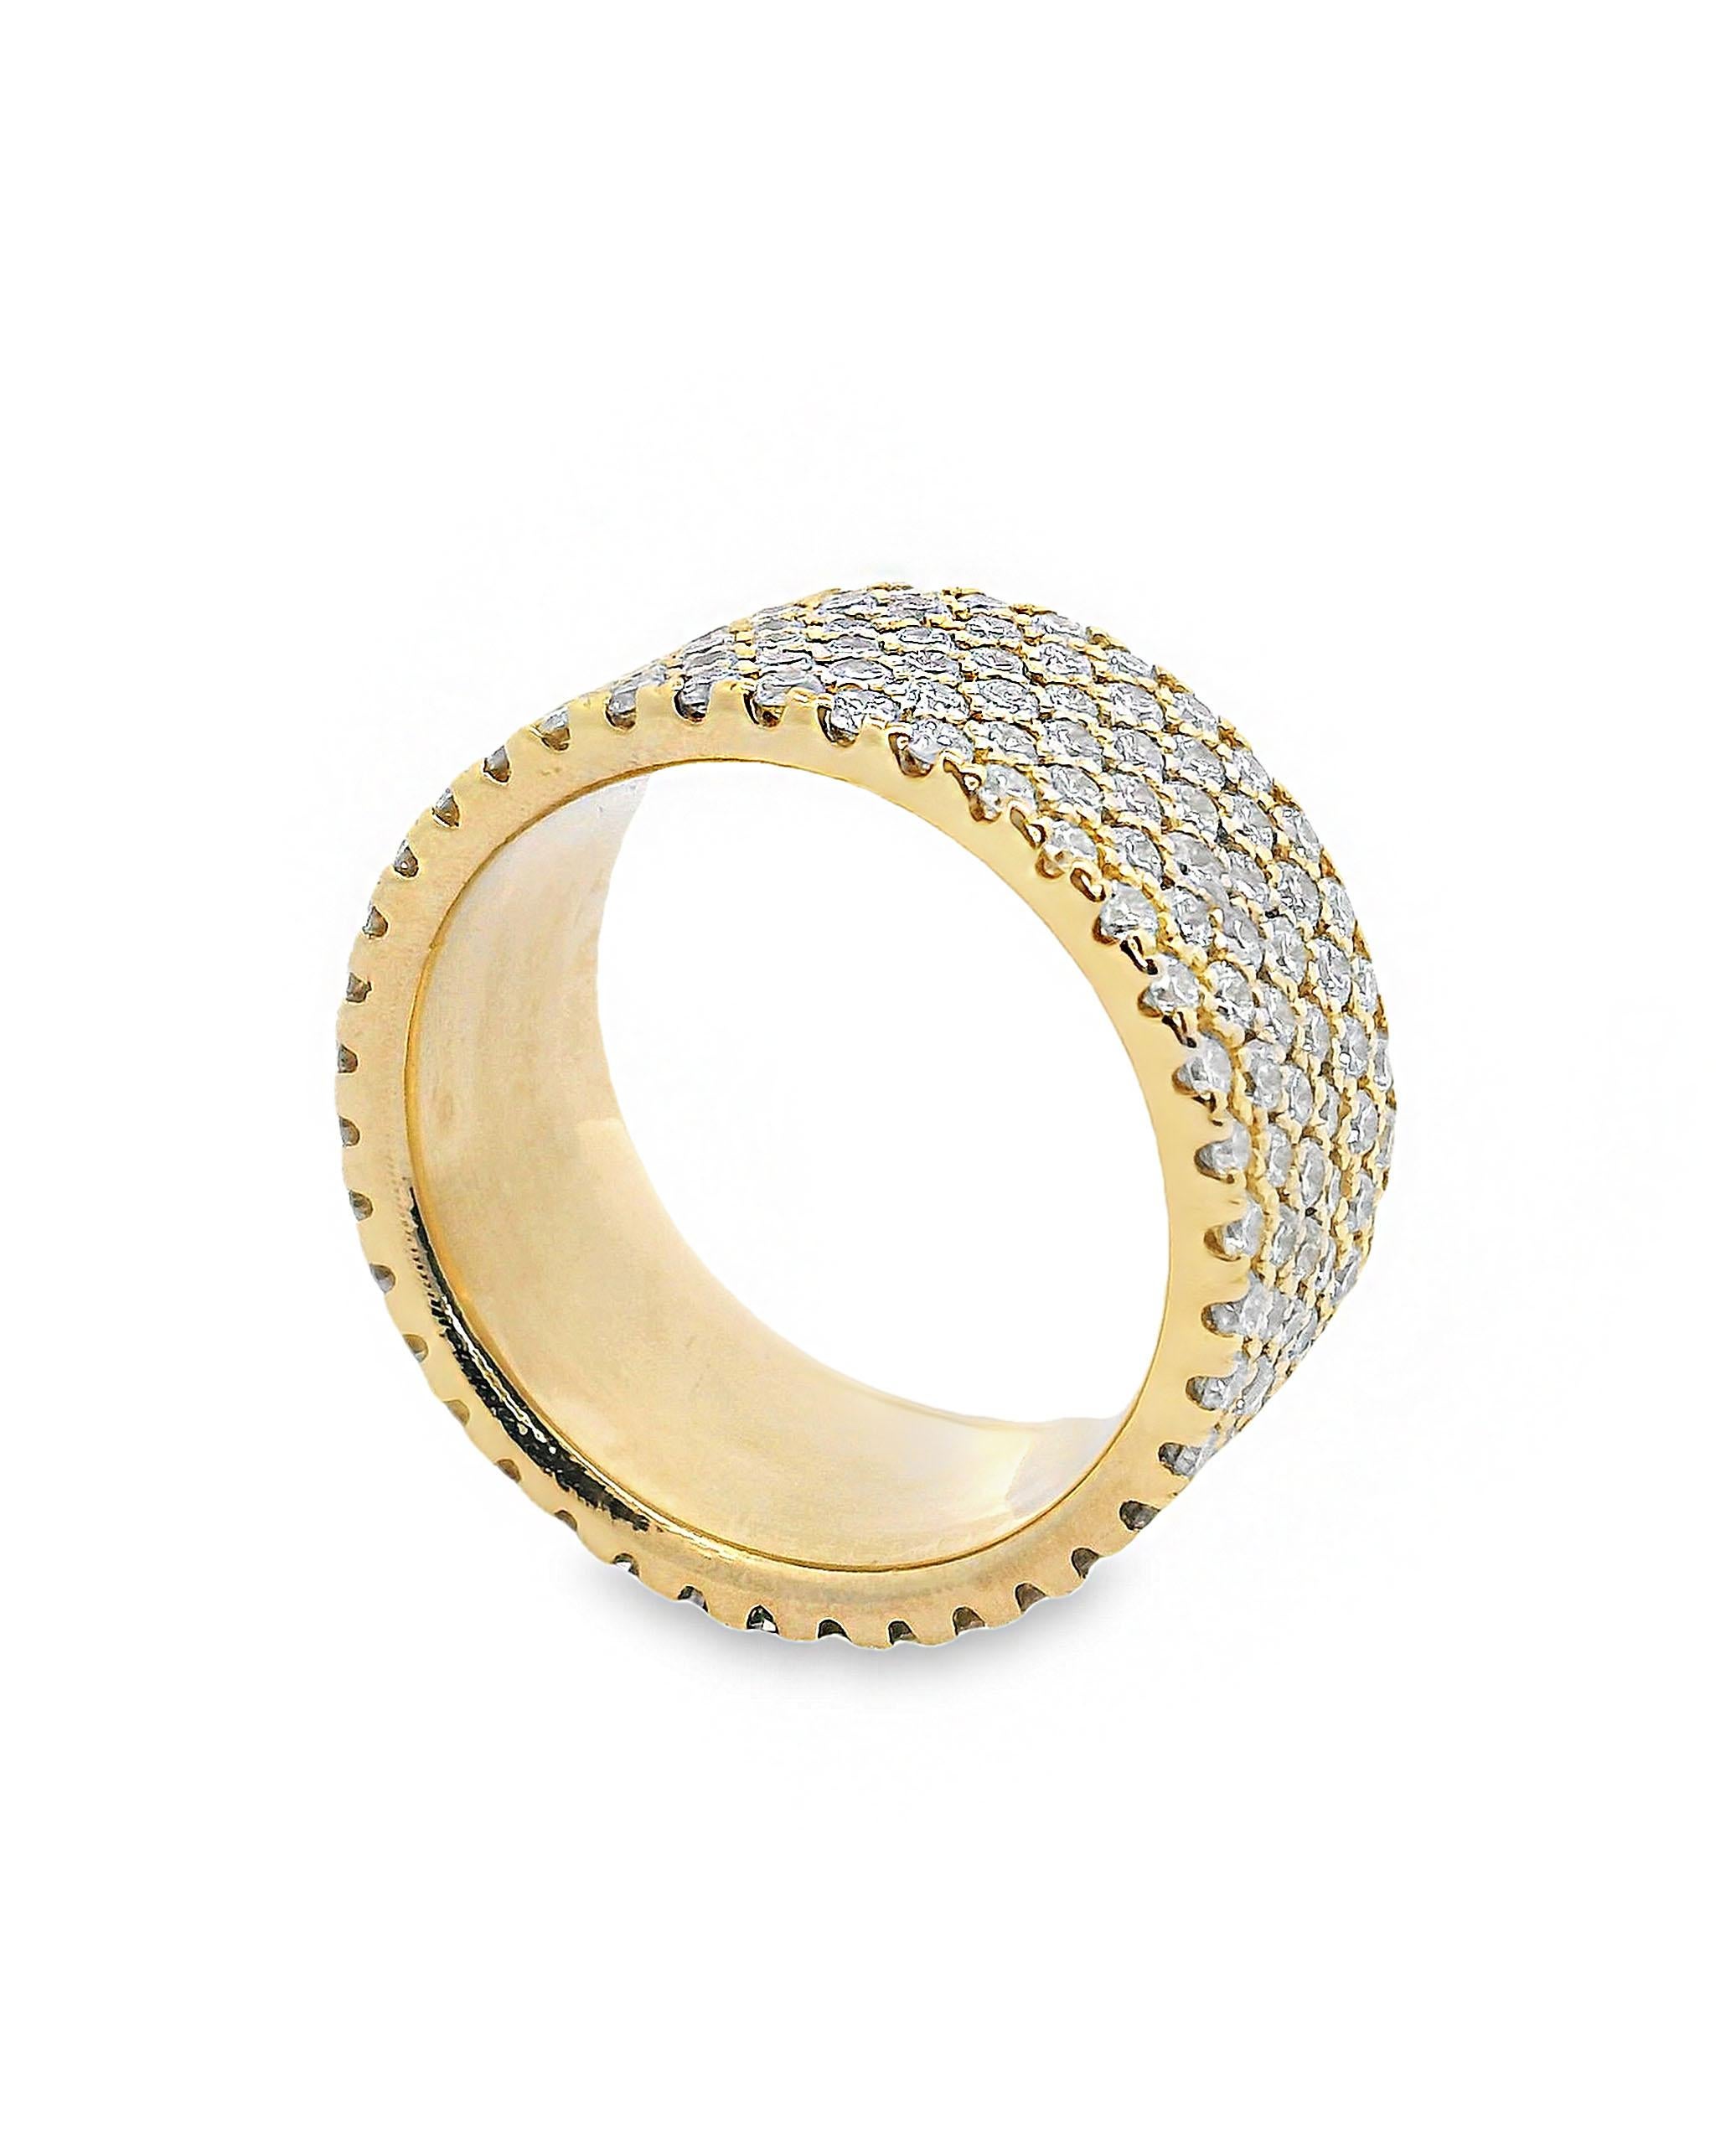 Contemporary 14K Yellow Gold 6 Row Diamond Eternity Ring For Sale